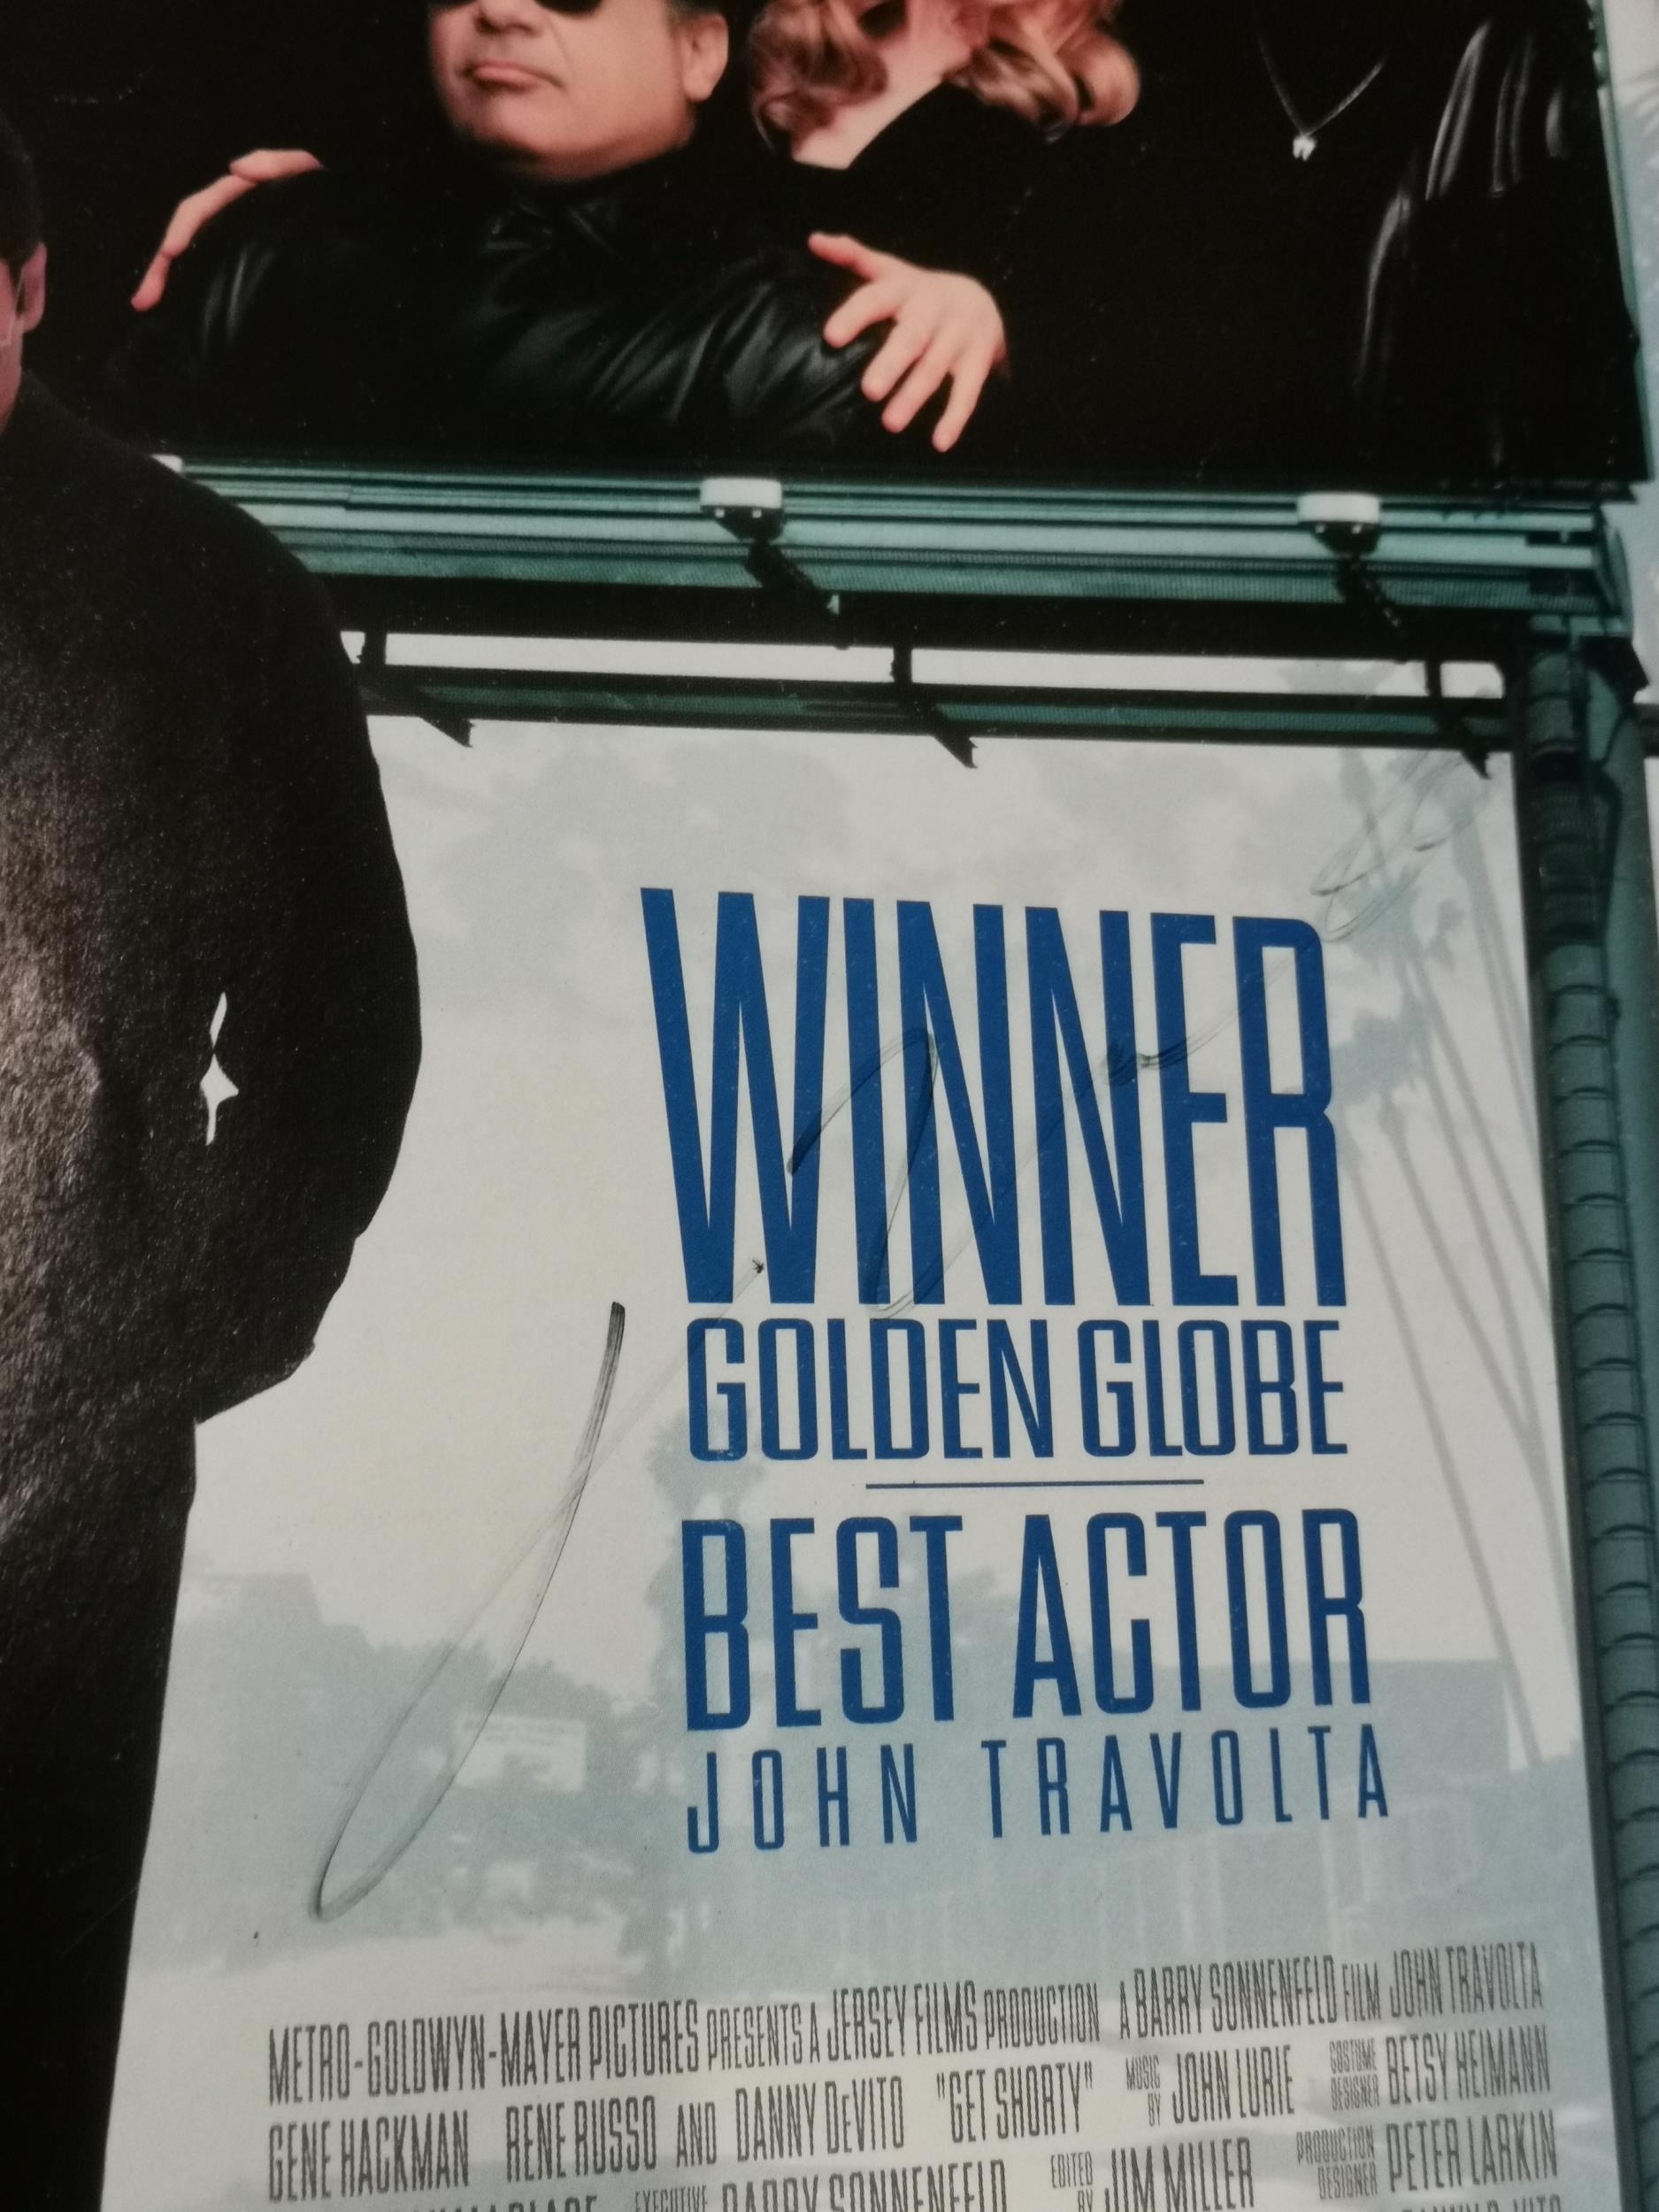 A promotional Golden Globe poster for Get Shorty by John Travolta, with certificate Location: 6:1 - Image 2 of 3